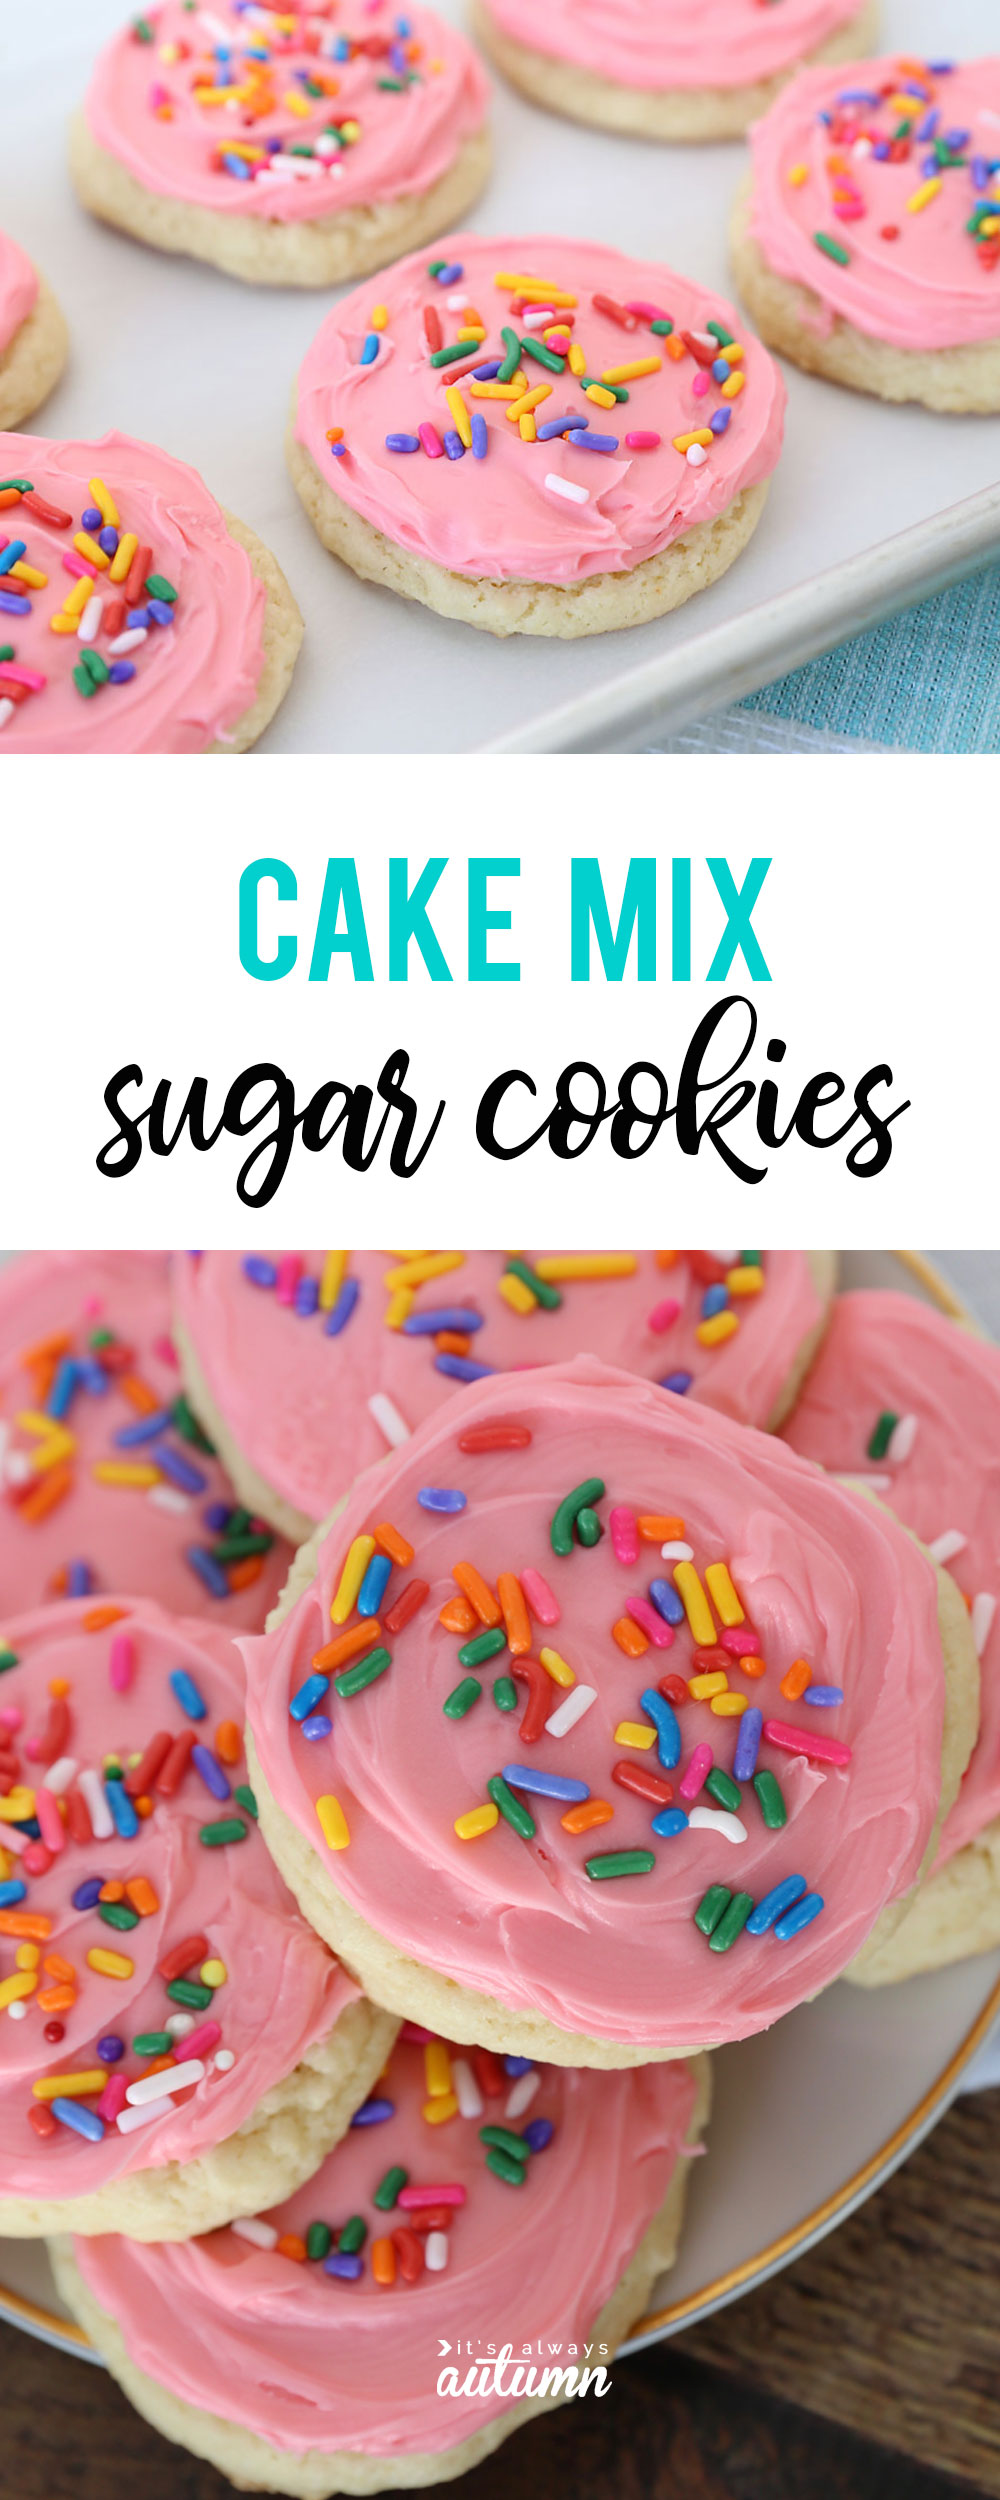 Sugar cookies made from a cake mix with pink frosting and sprinkles